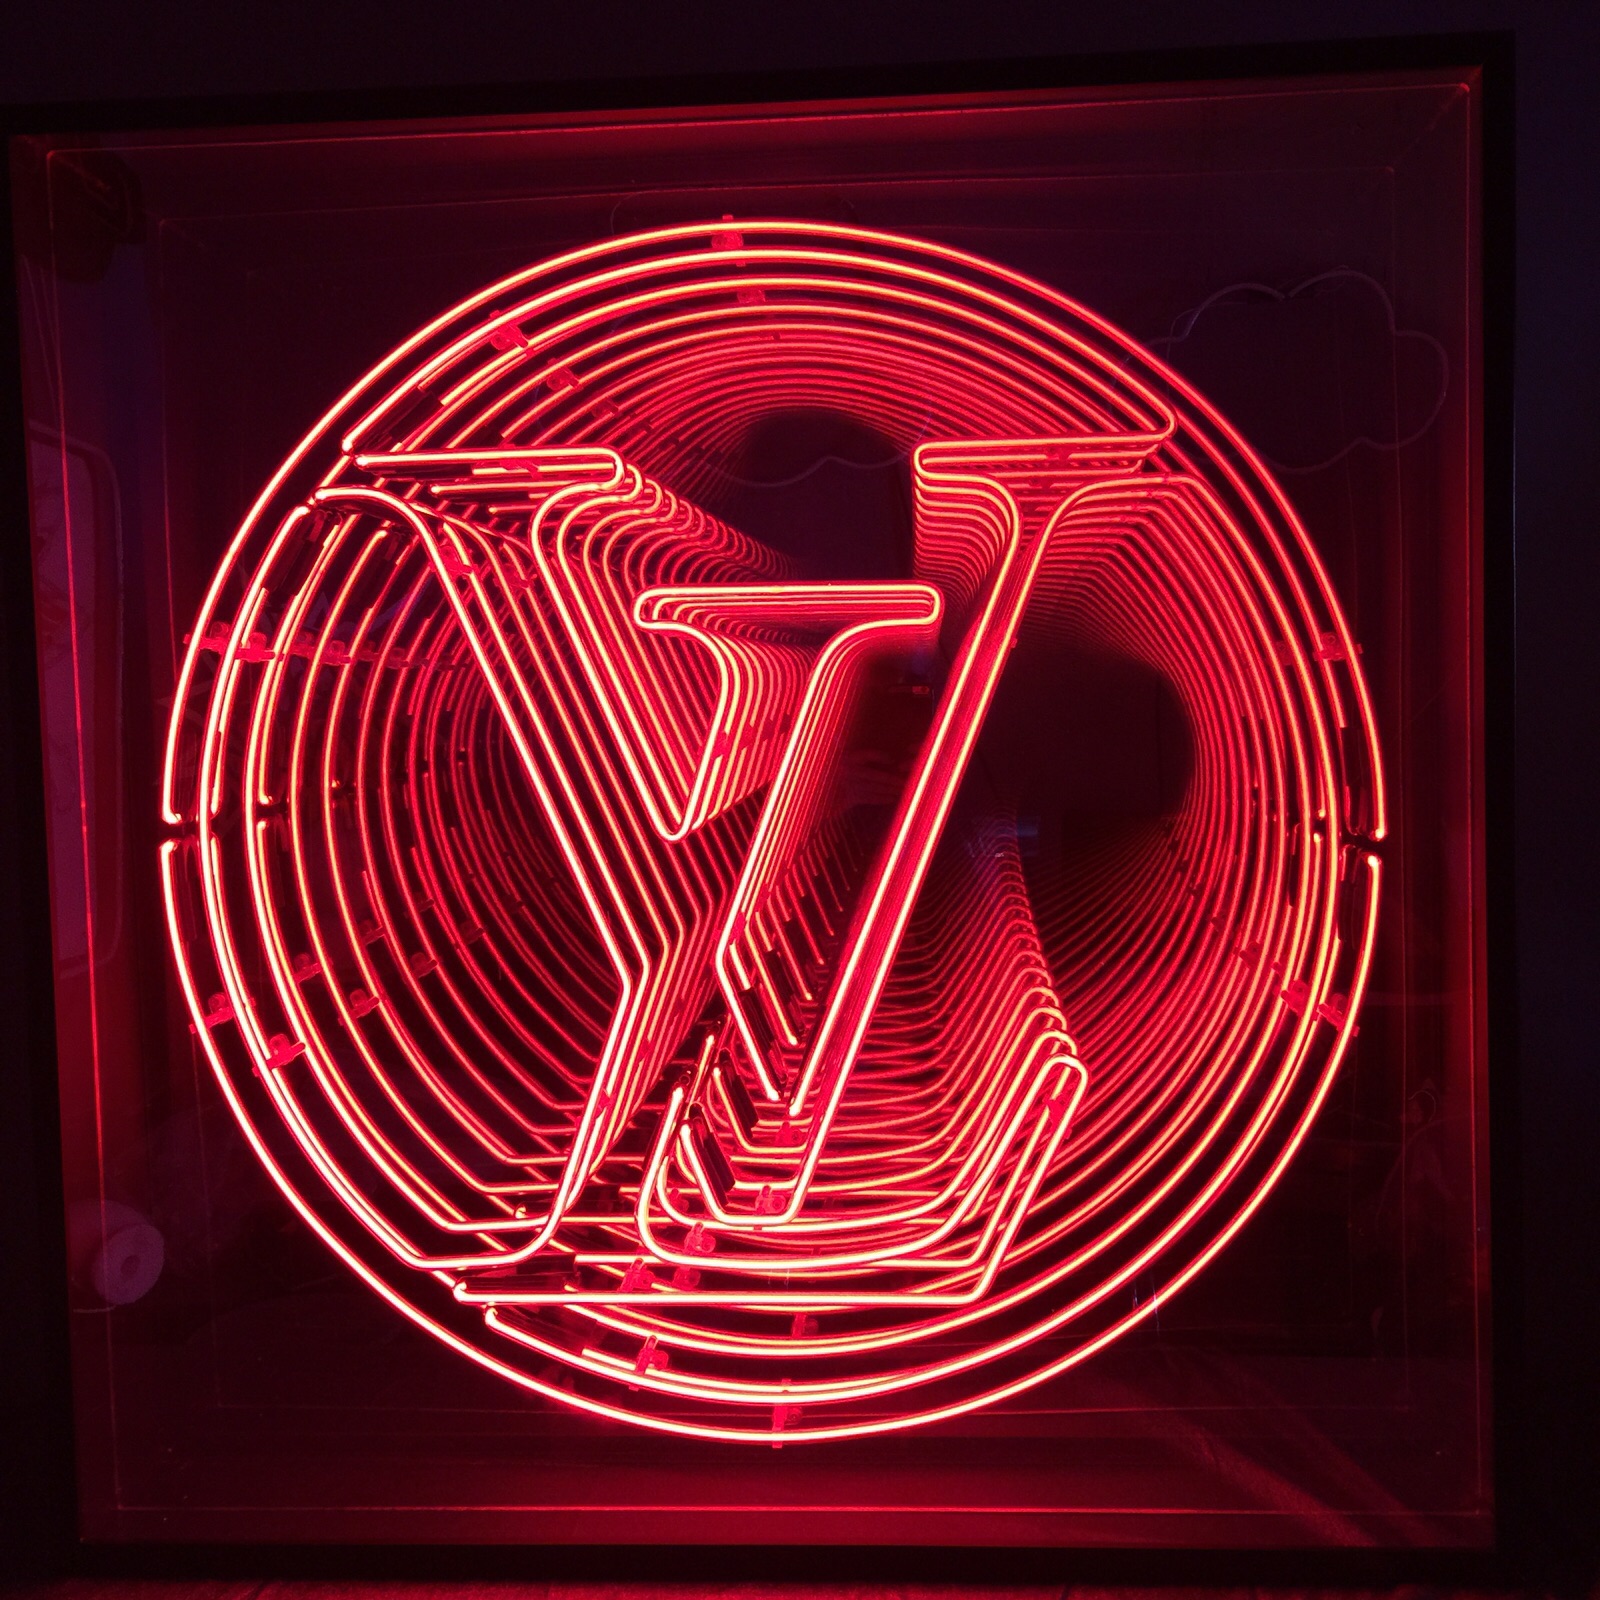 Louis Vuitton - LED neon sign  Lv neon sign, Neon signs, Neon